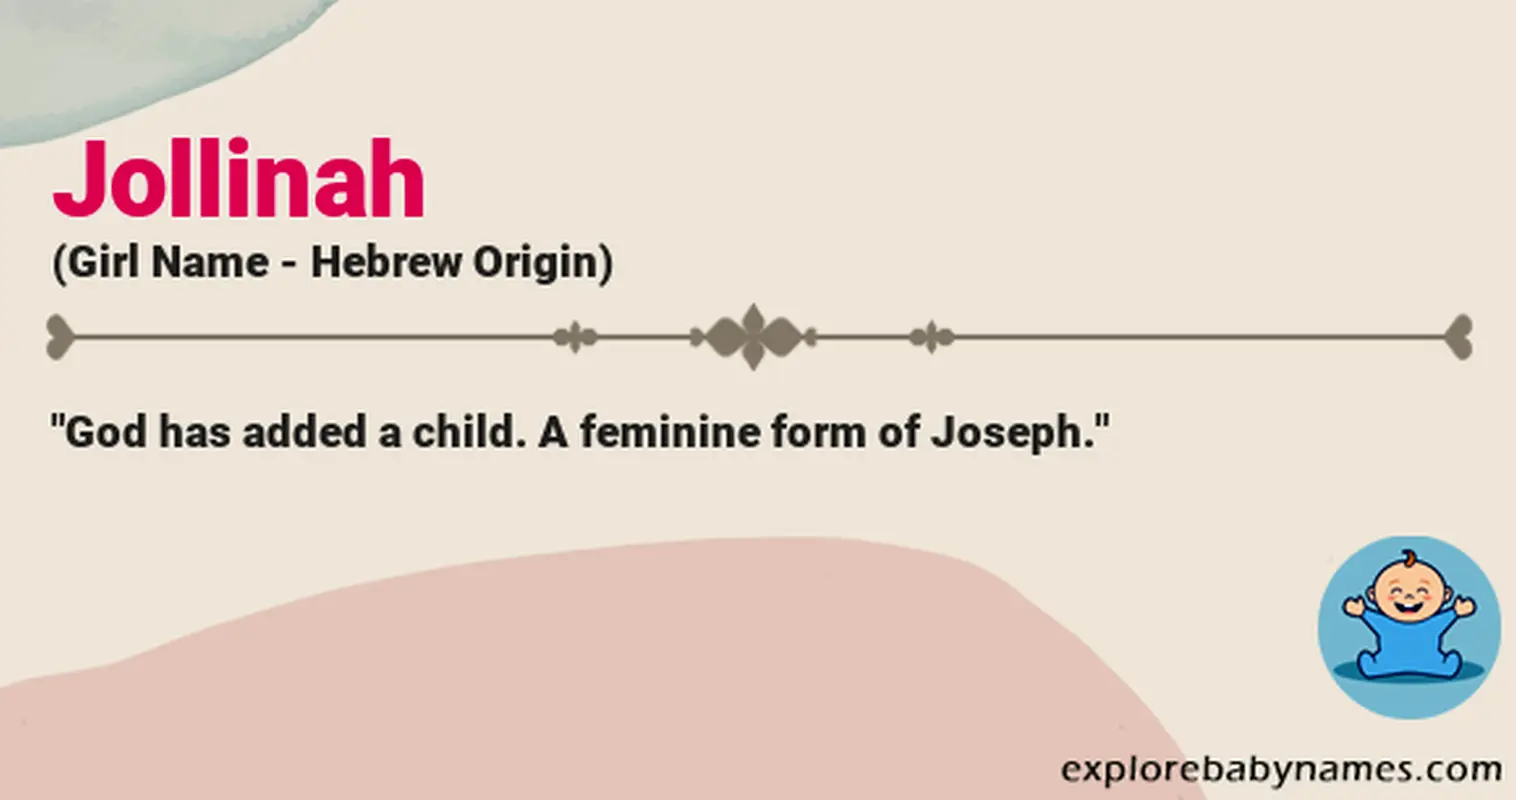 Meaning of Jollinah